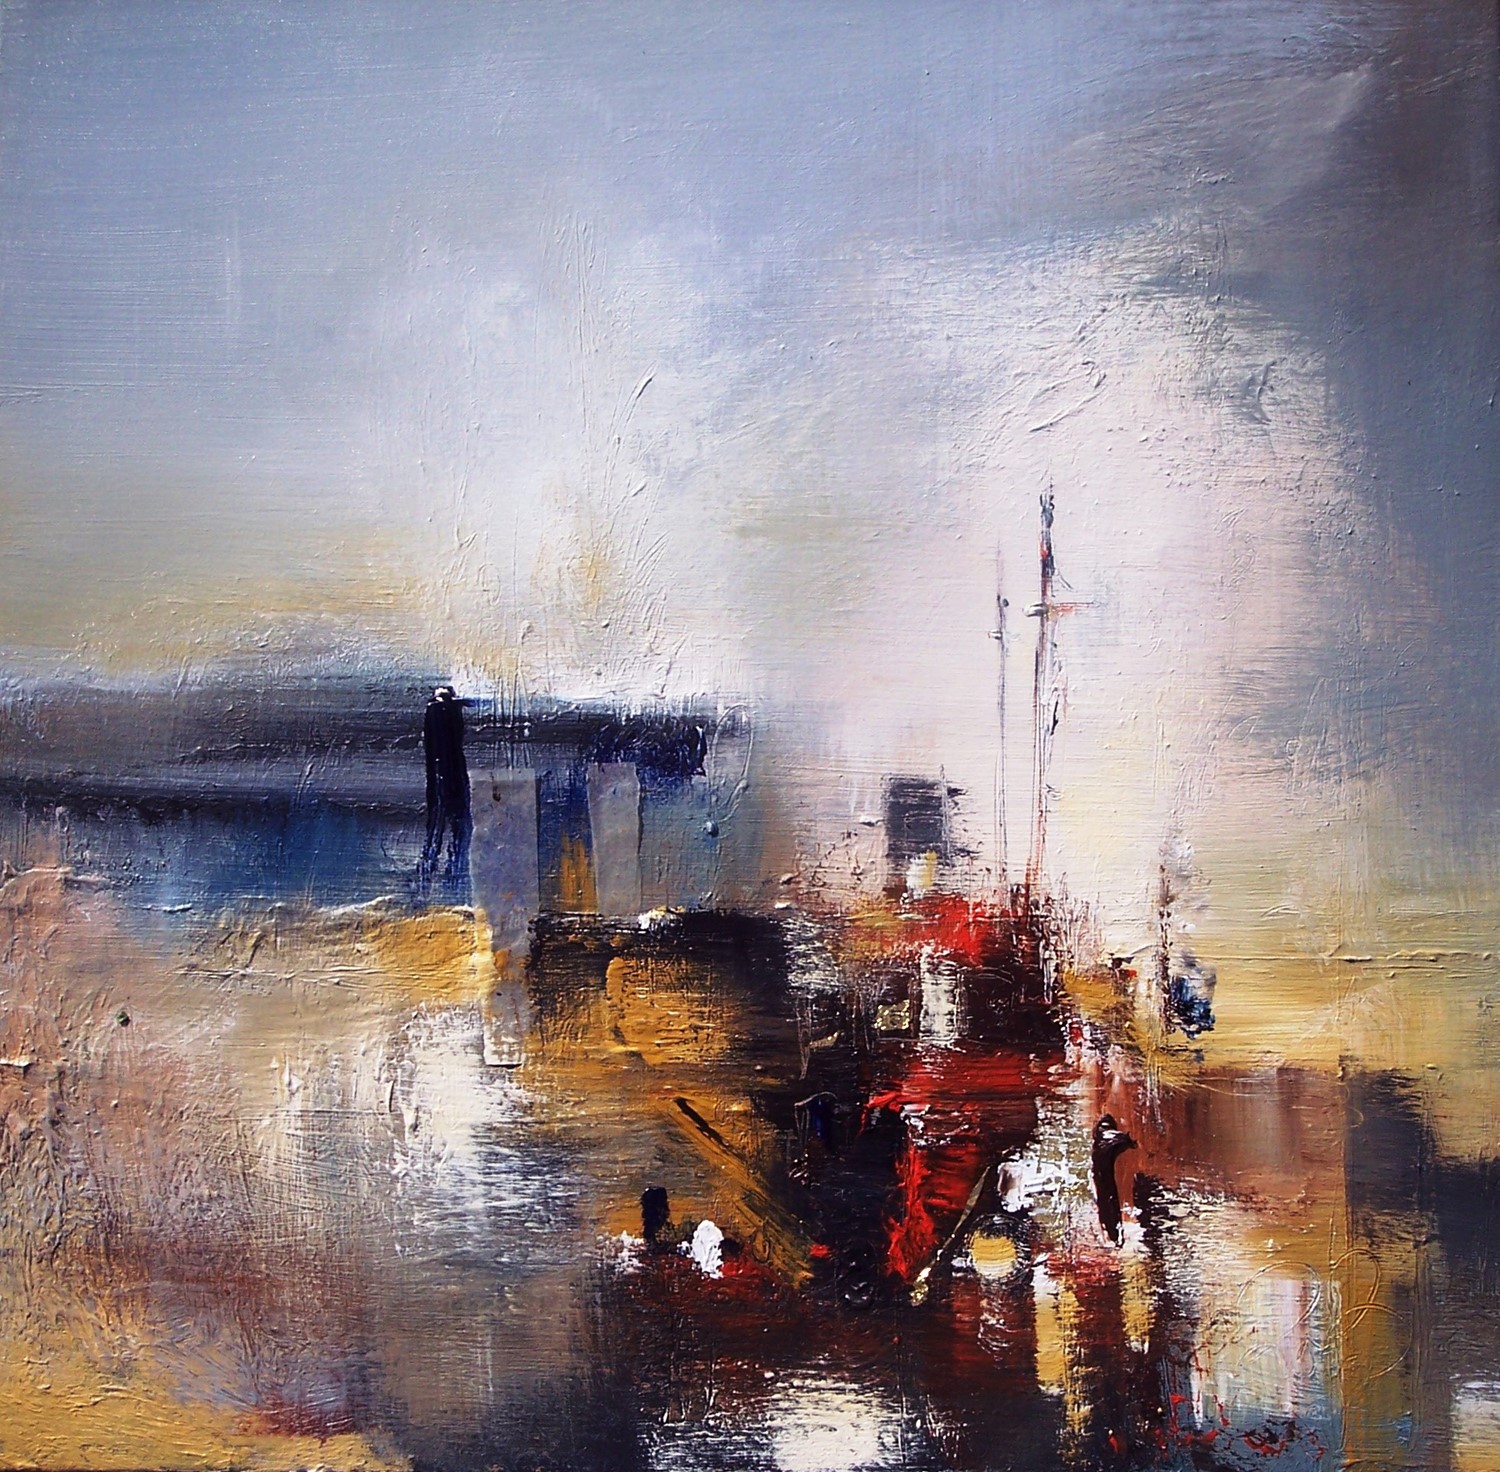 'Lingering at The Harbour' by artist Rosanne Barr